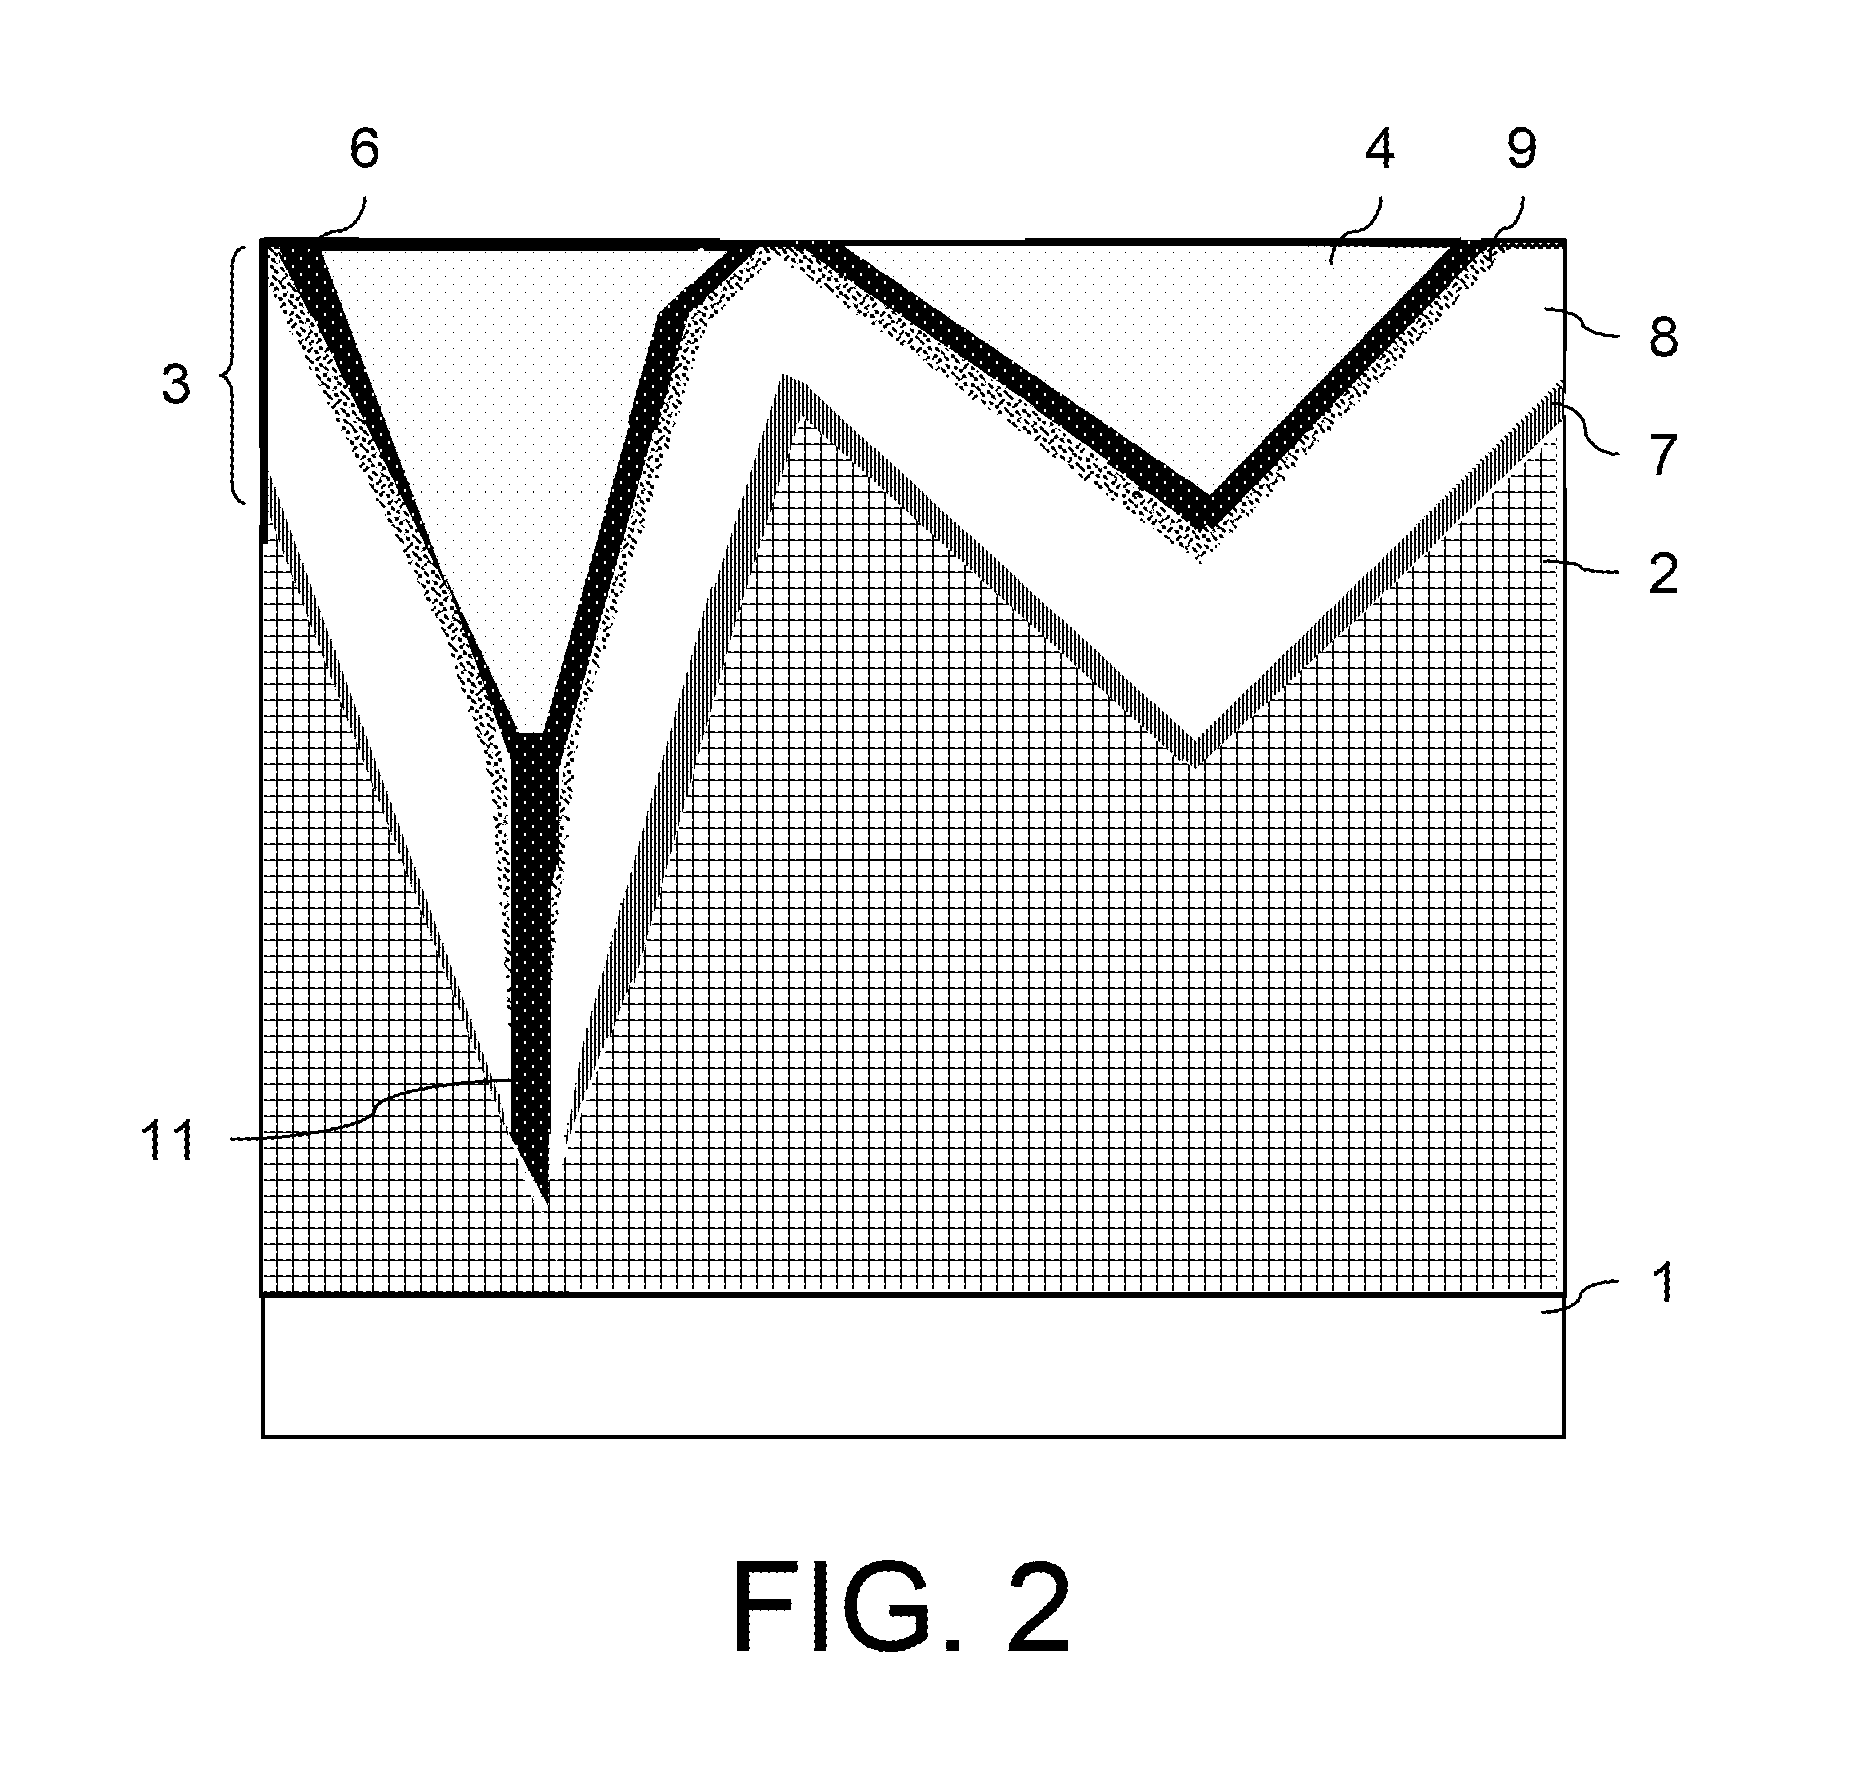 Method for obtaining high performance thin film devices deposited on highly textured substrates